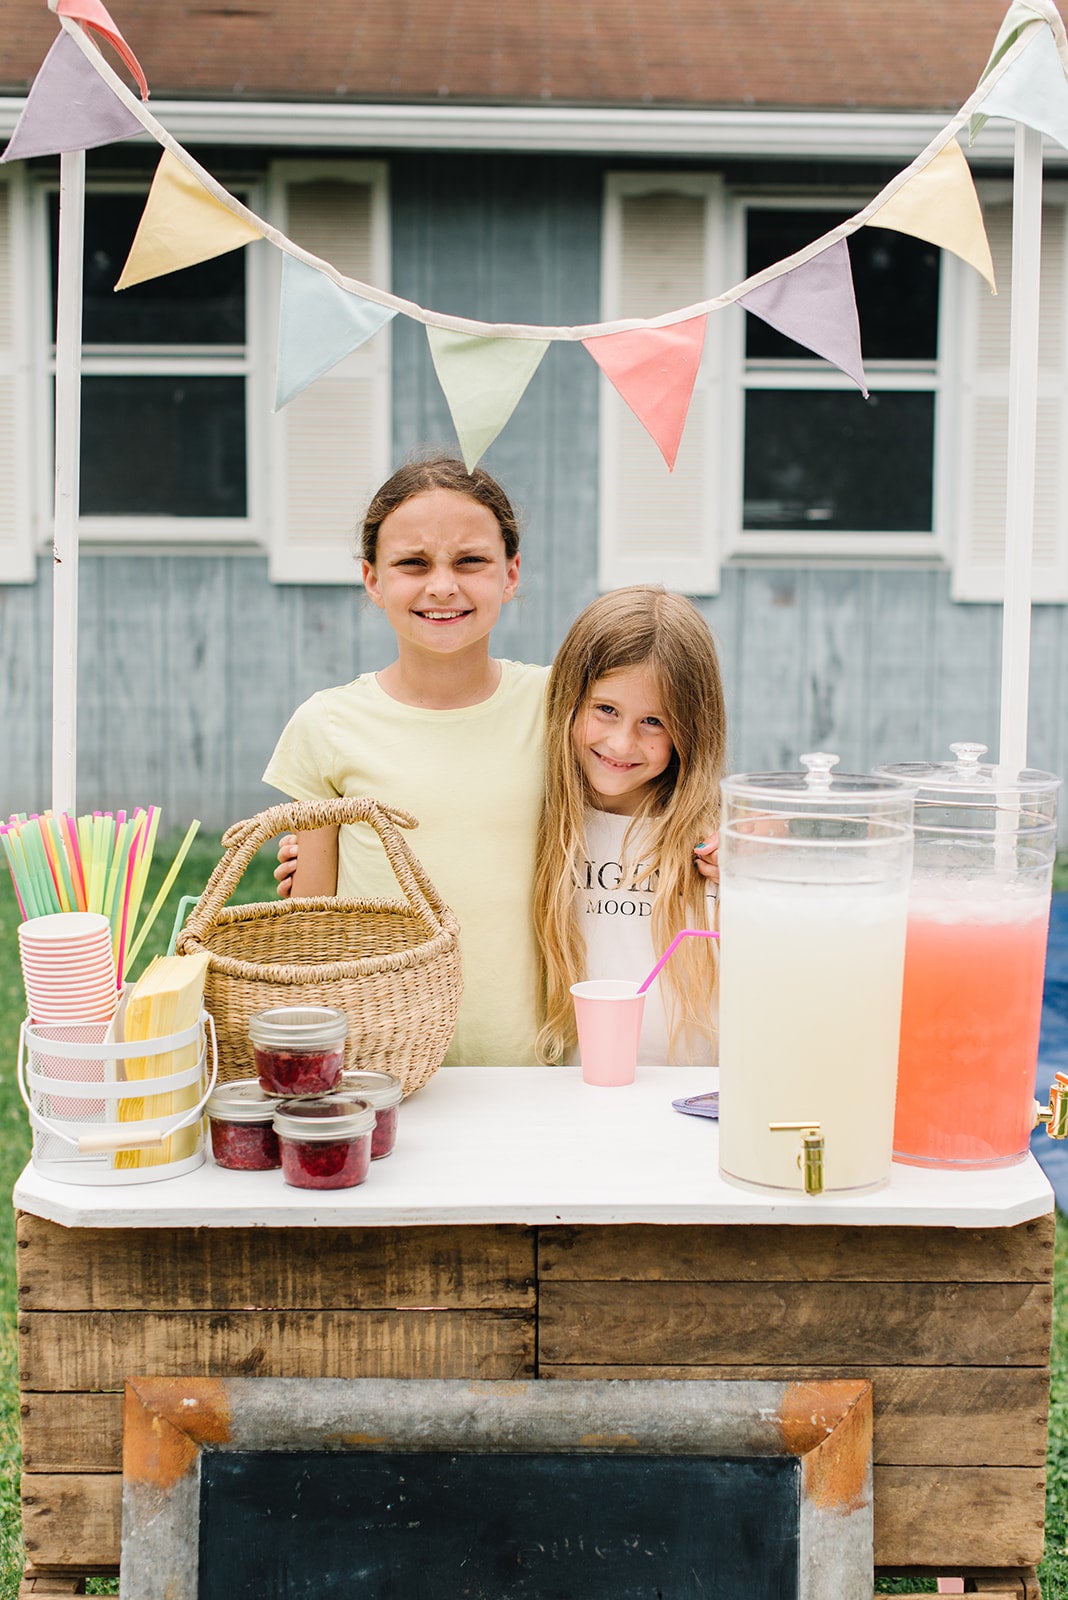 OUR SUMMER LEMONADE STAND (USING IKEA KIDS TABLES!) — WINTER DAISY